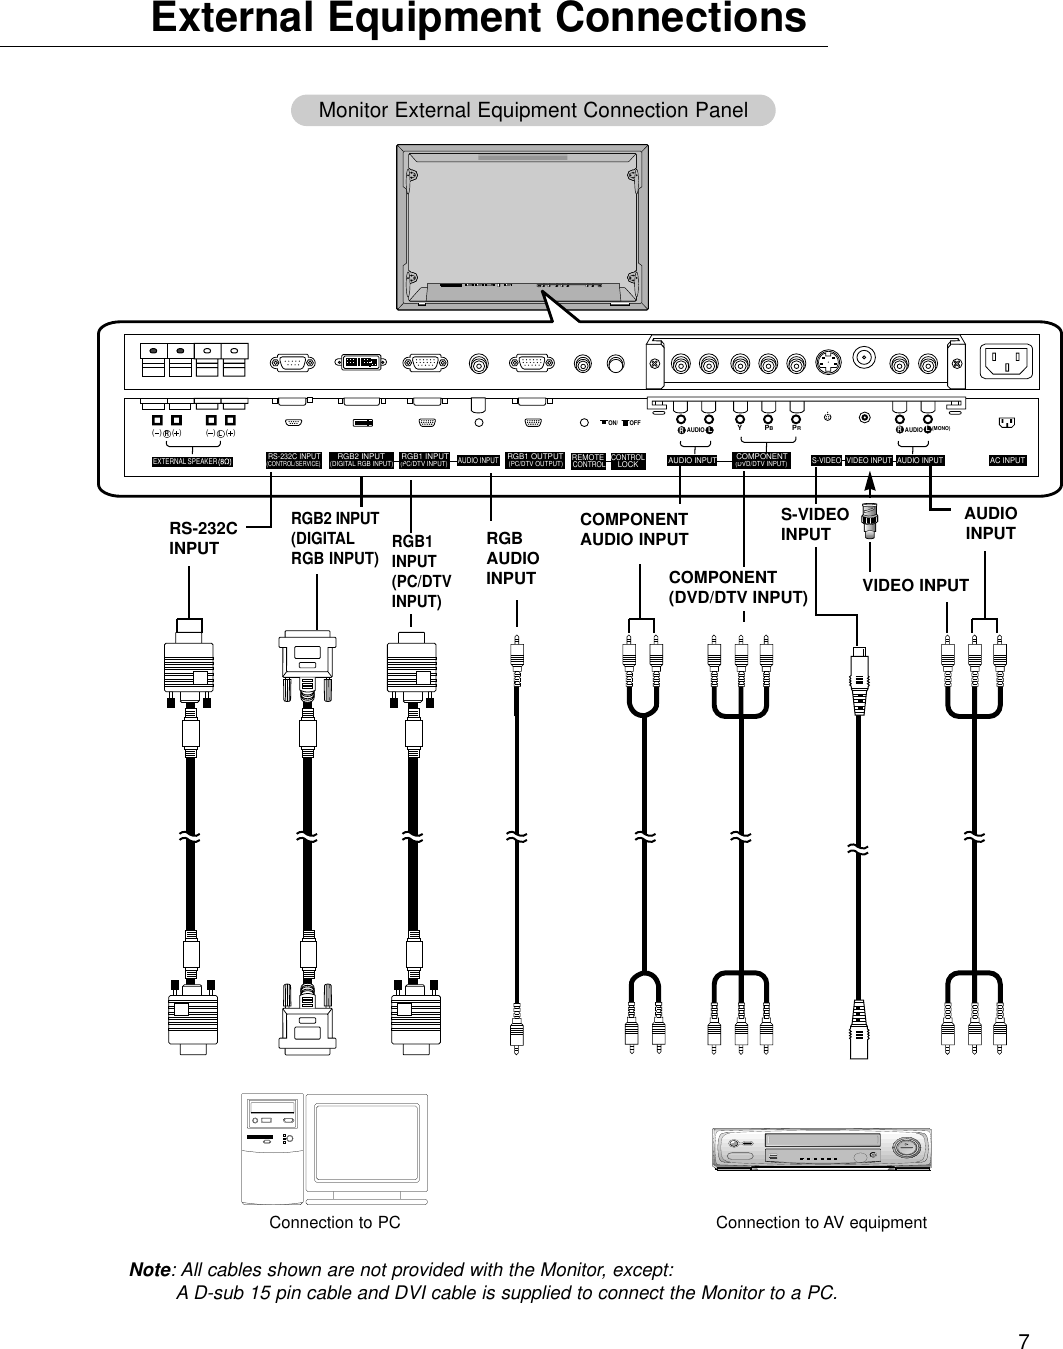 7External Equipment ConnectionsConnection to PCNote: All cables shown are not provided with the Monitor, except:A D-sub 15 pin cable and DVI cable is supplied to connect the Monitor to a PC.Connection to AV equipment(  )(  )R(  )(  )LREMOTECONTROLRGB2 INPUT(DIGITAL RGB INPUT)RGB1 INPUT(PC/DTV INPUT)RGB1 OUTPUT(PC/DTV OUTPUT)COMPONENT(DVD/DTV INPUT)RS-232C INPUT(CONTROL/SERVICE)EXTERNAL SPEAKERLOCKCONTROLON/ OFFYPBPR(MONO)RAUDIOLRAUDIOLS-VIDEO VIDEO INPUTAC INPUTAUDIO INPUTAUDIO INPUTAUDIO INPUTAUDIOINPUTVIDEO INPUTCOMPONENT(DVD/DTV INPUT)S-VIDEOINPUTCOMPONENTAUDIO INPUTMonitor External Equipment Connection PanelRS-232CINPUTRGB2 INPUT(DIGITALRGB INPUT) RGB1INPUT(PC/DTV INPUT)RGBAUDIO INPUT